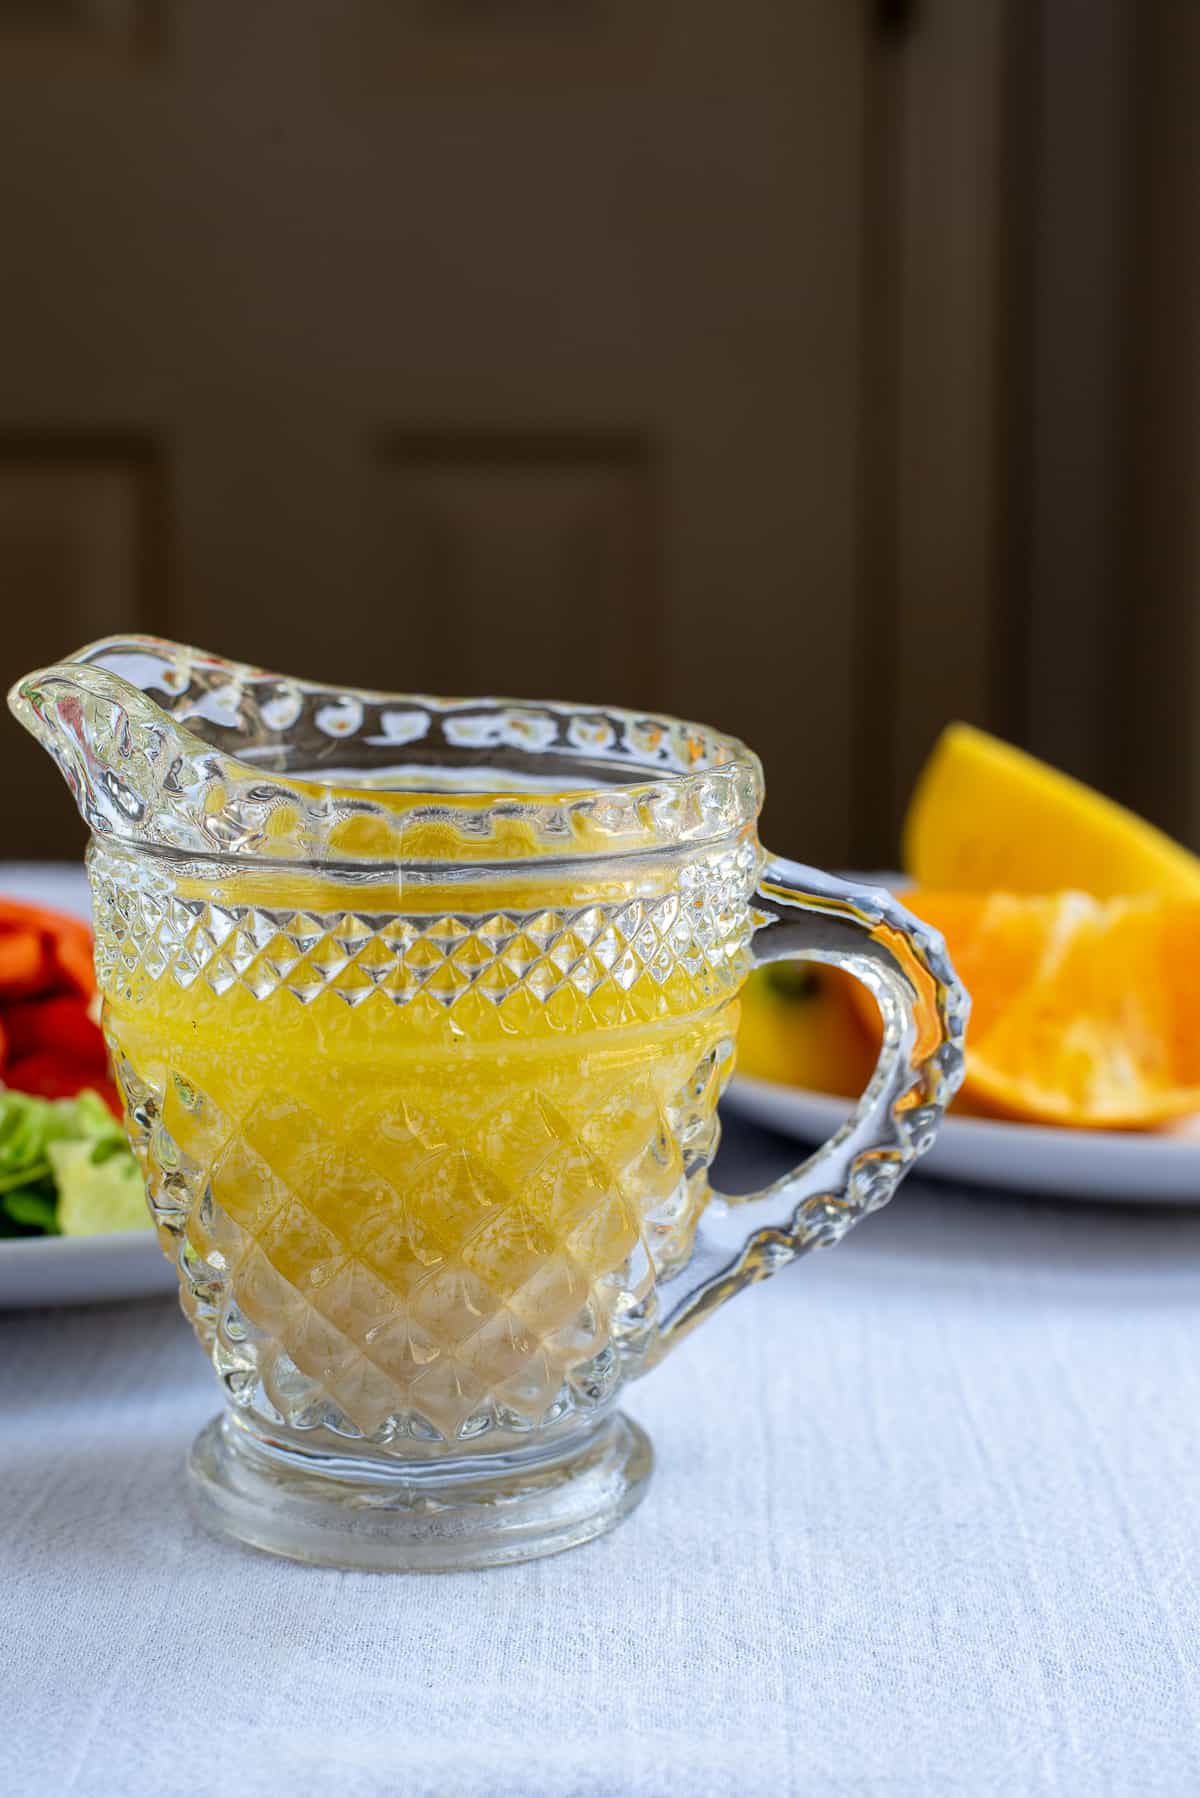 citrus salad dressing in glass pitcher with oranges in background